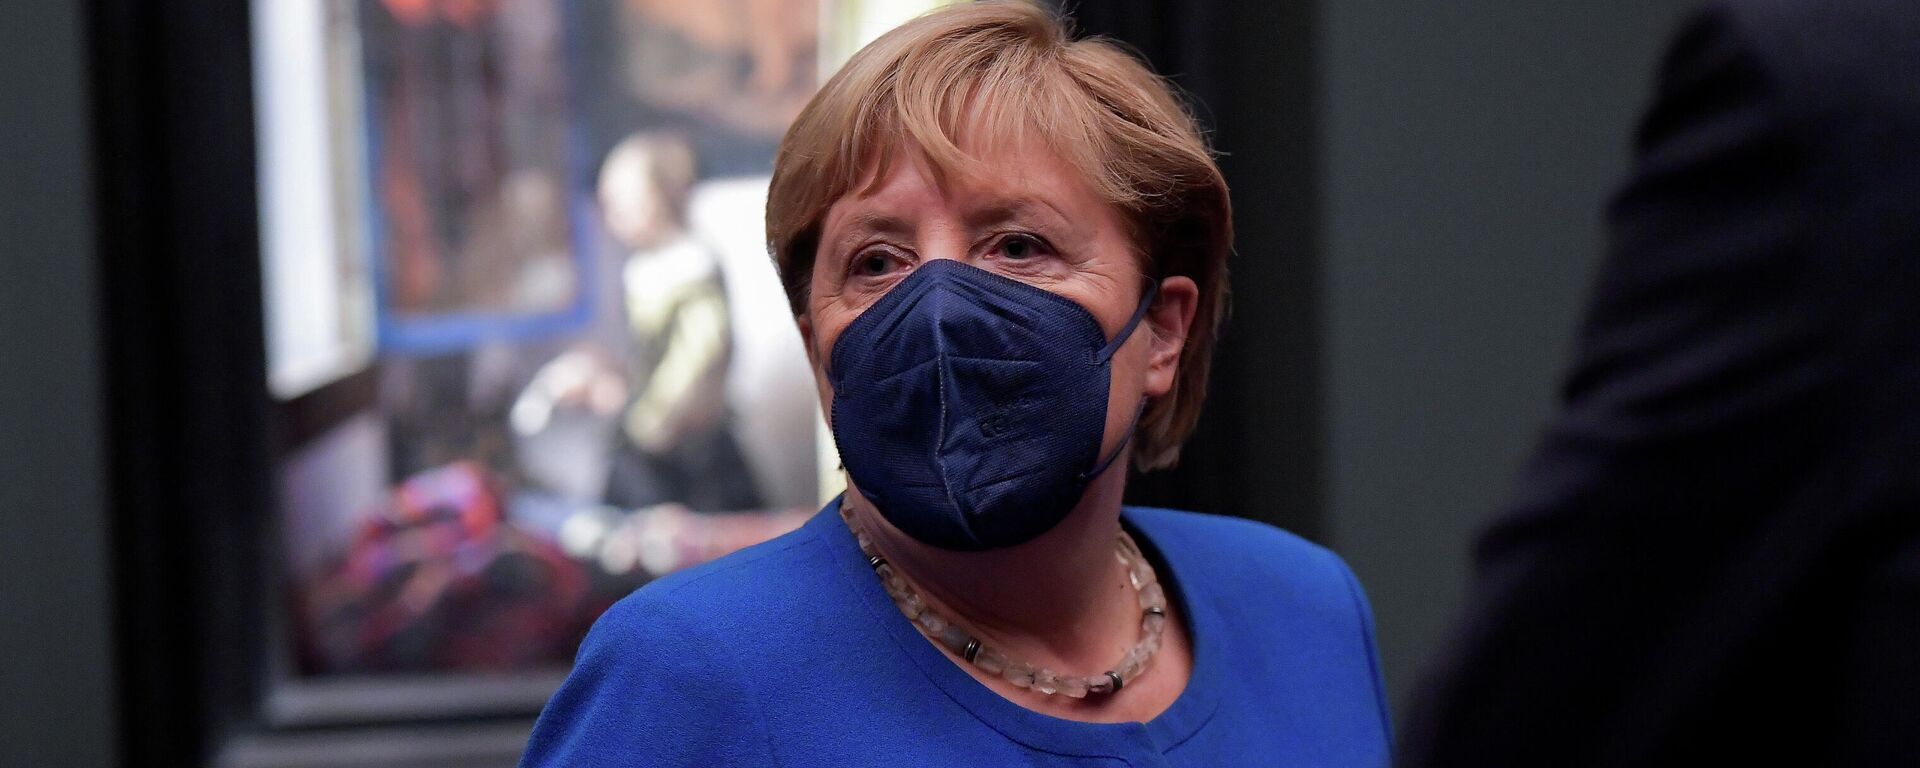 German Chancellor Angela Merkel attends the opening of the largest exhibition on the Dutch painter Johannes Vermeer in Germany, September 9, 2021 - Sputnik International, 1920, 09.09.2021